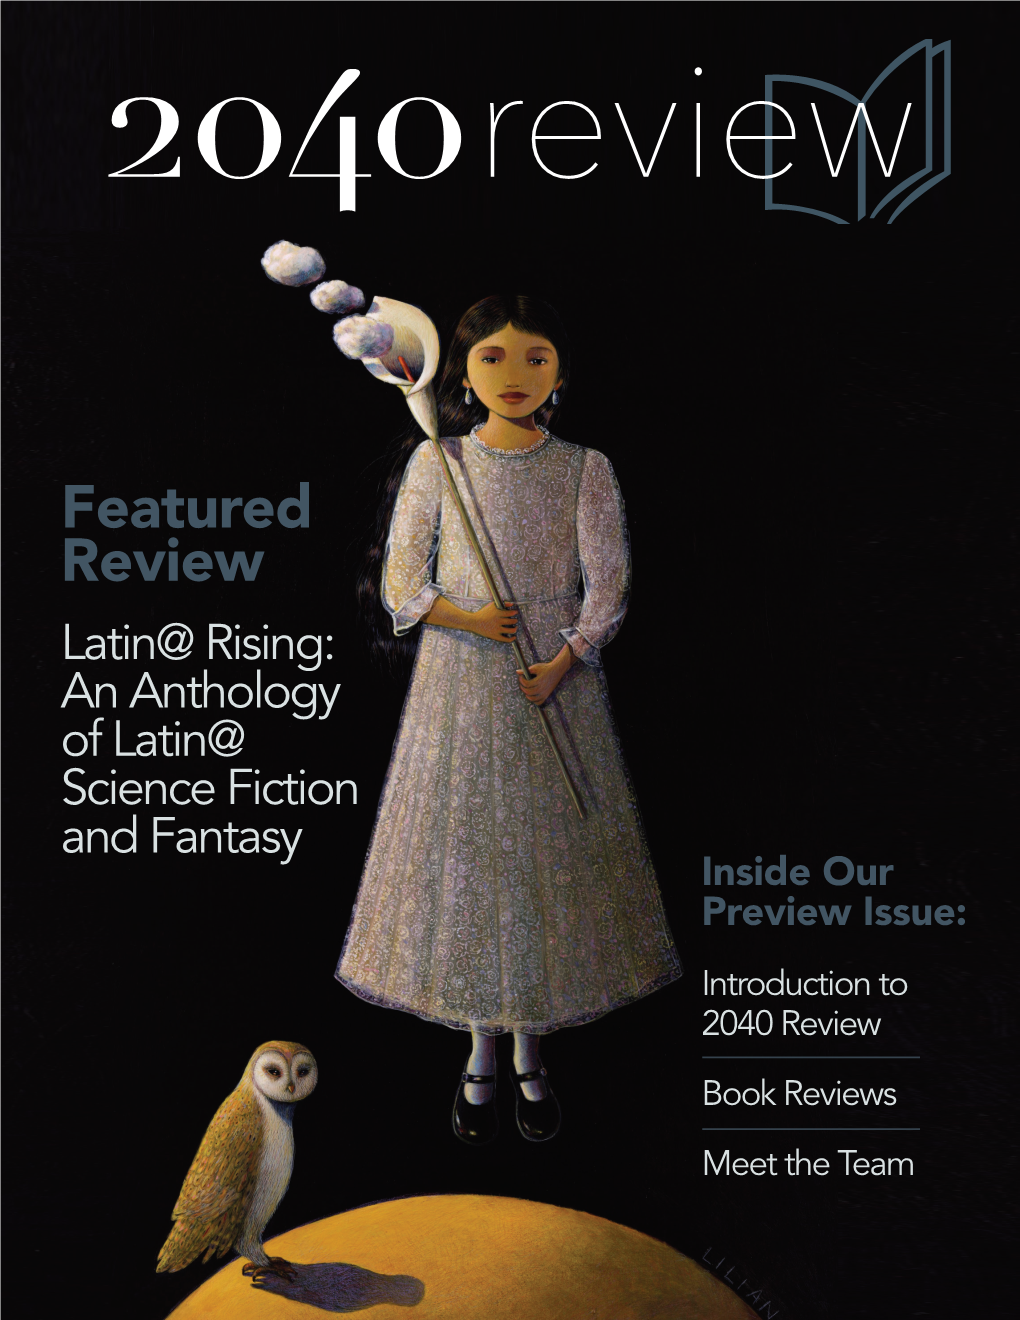 2040 Review Preview Issue